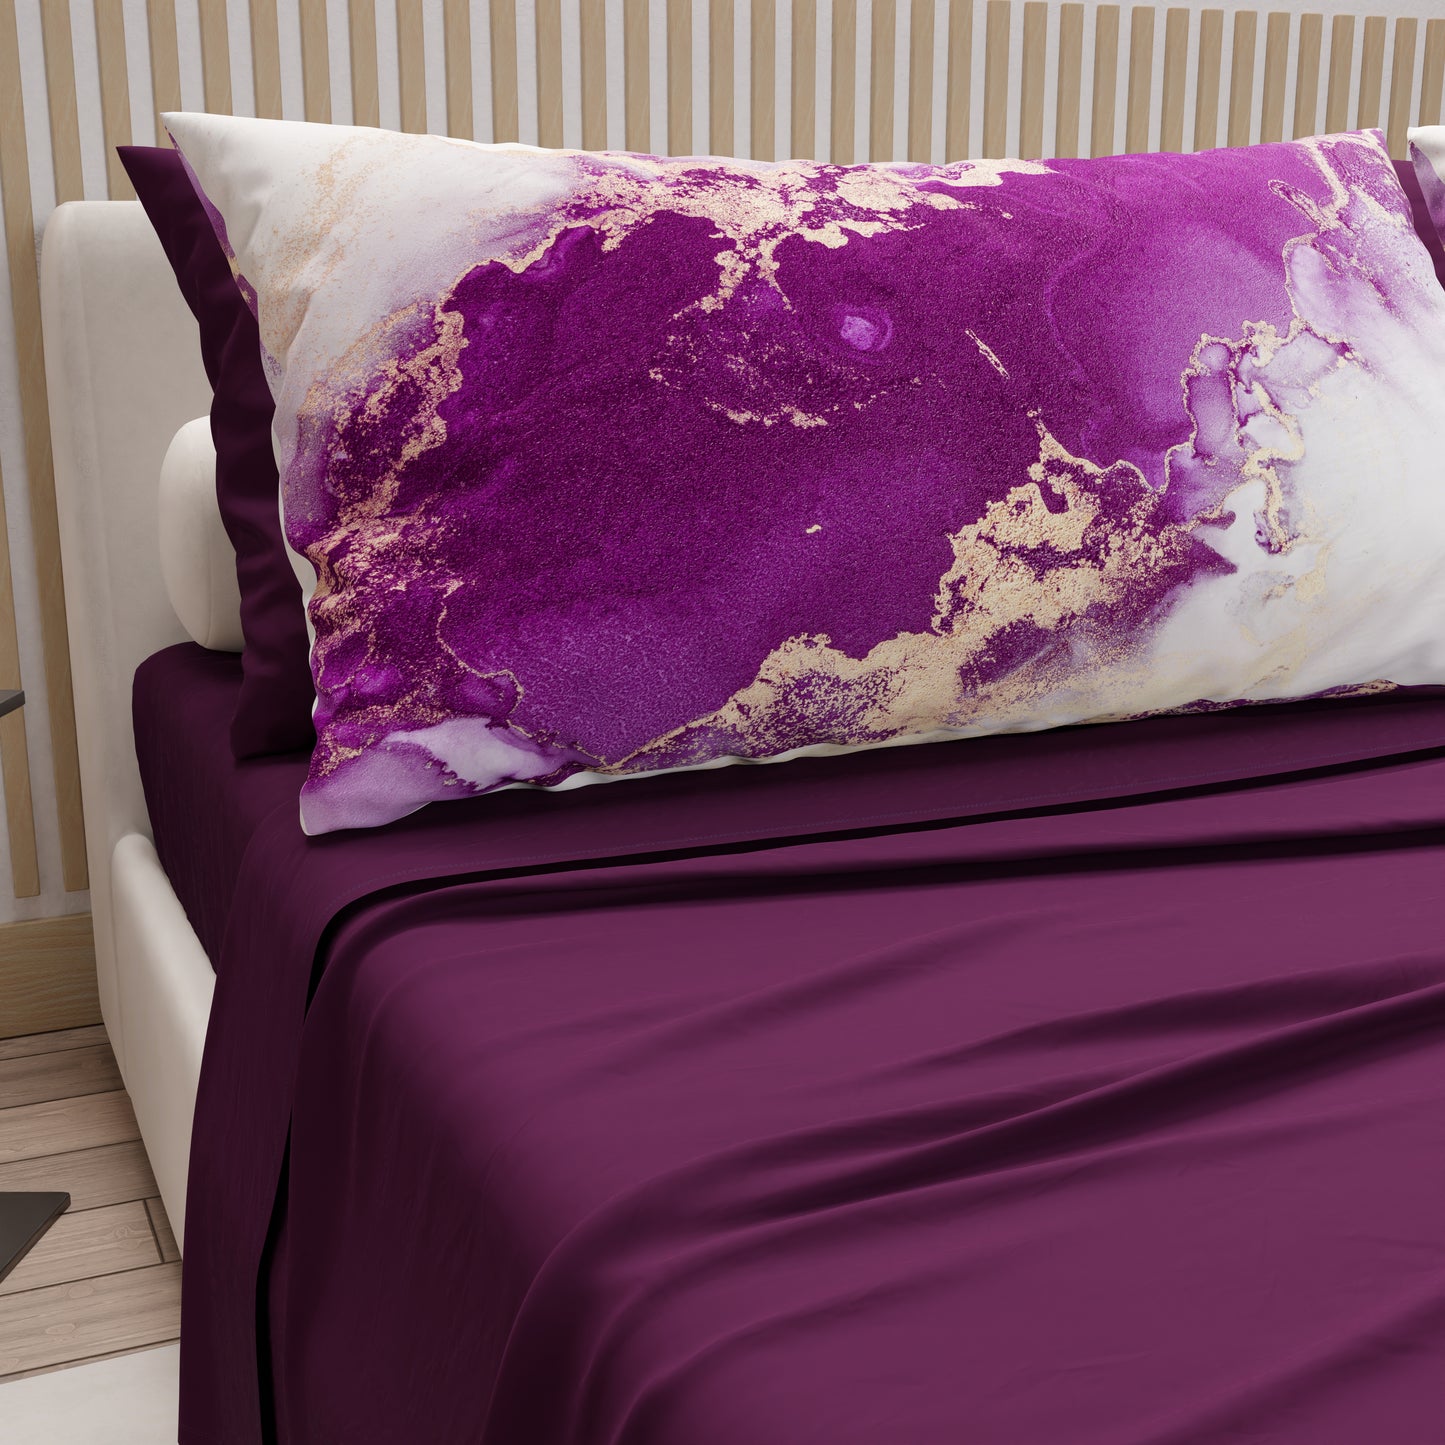 Cotton Sheets, Bed Set with Marble 01 Digital Print Pillowcases